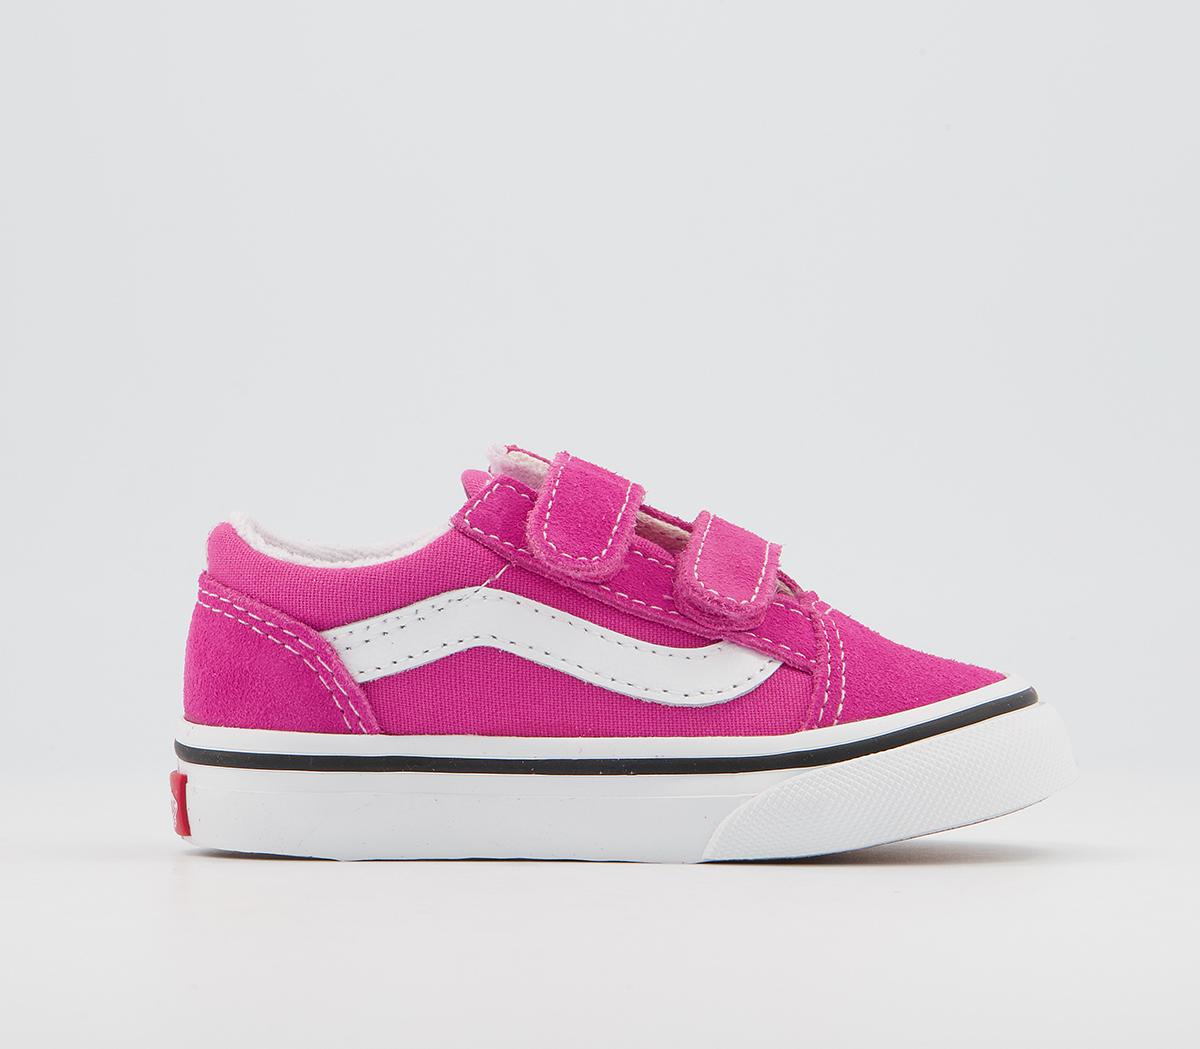 purple vans for toddlers